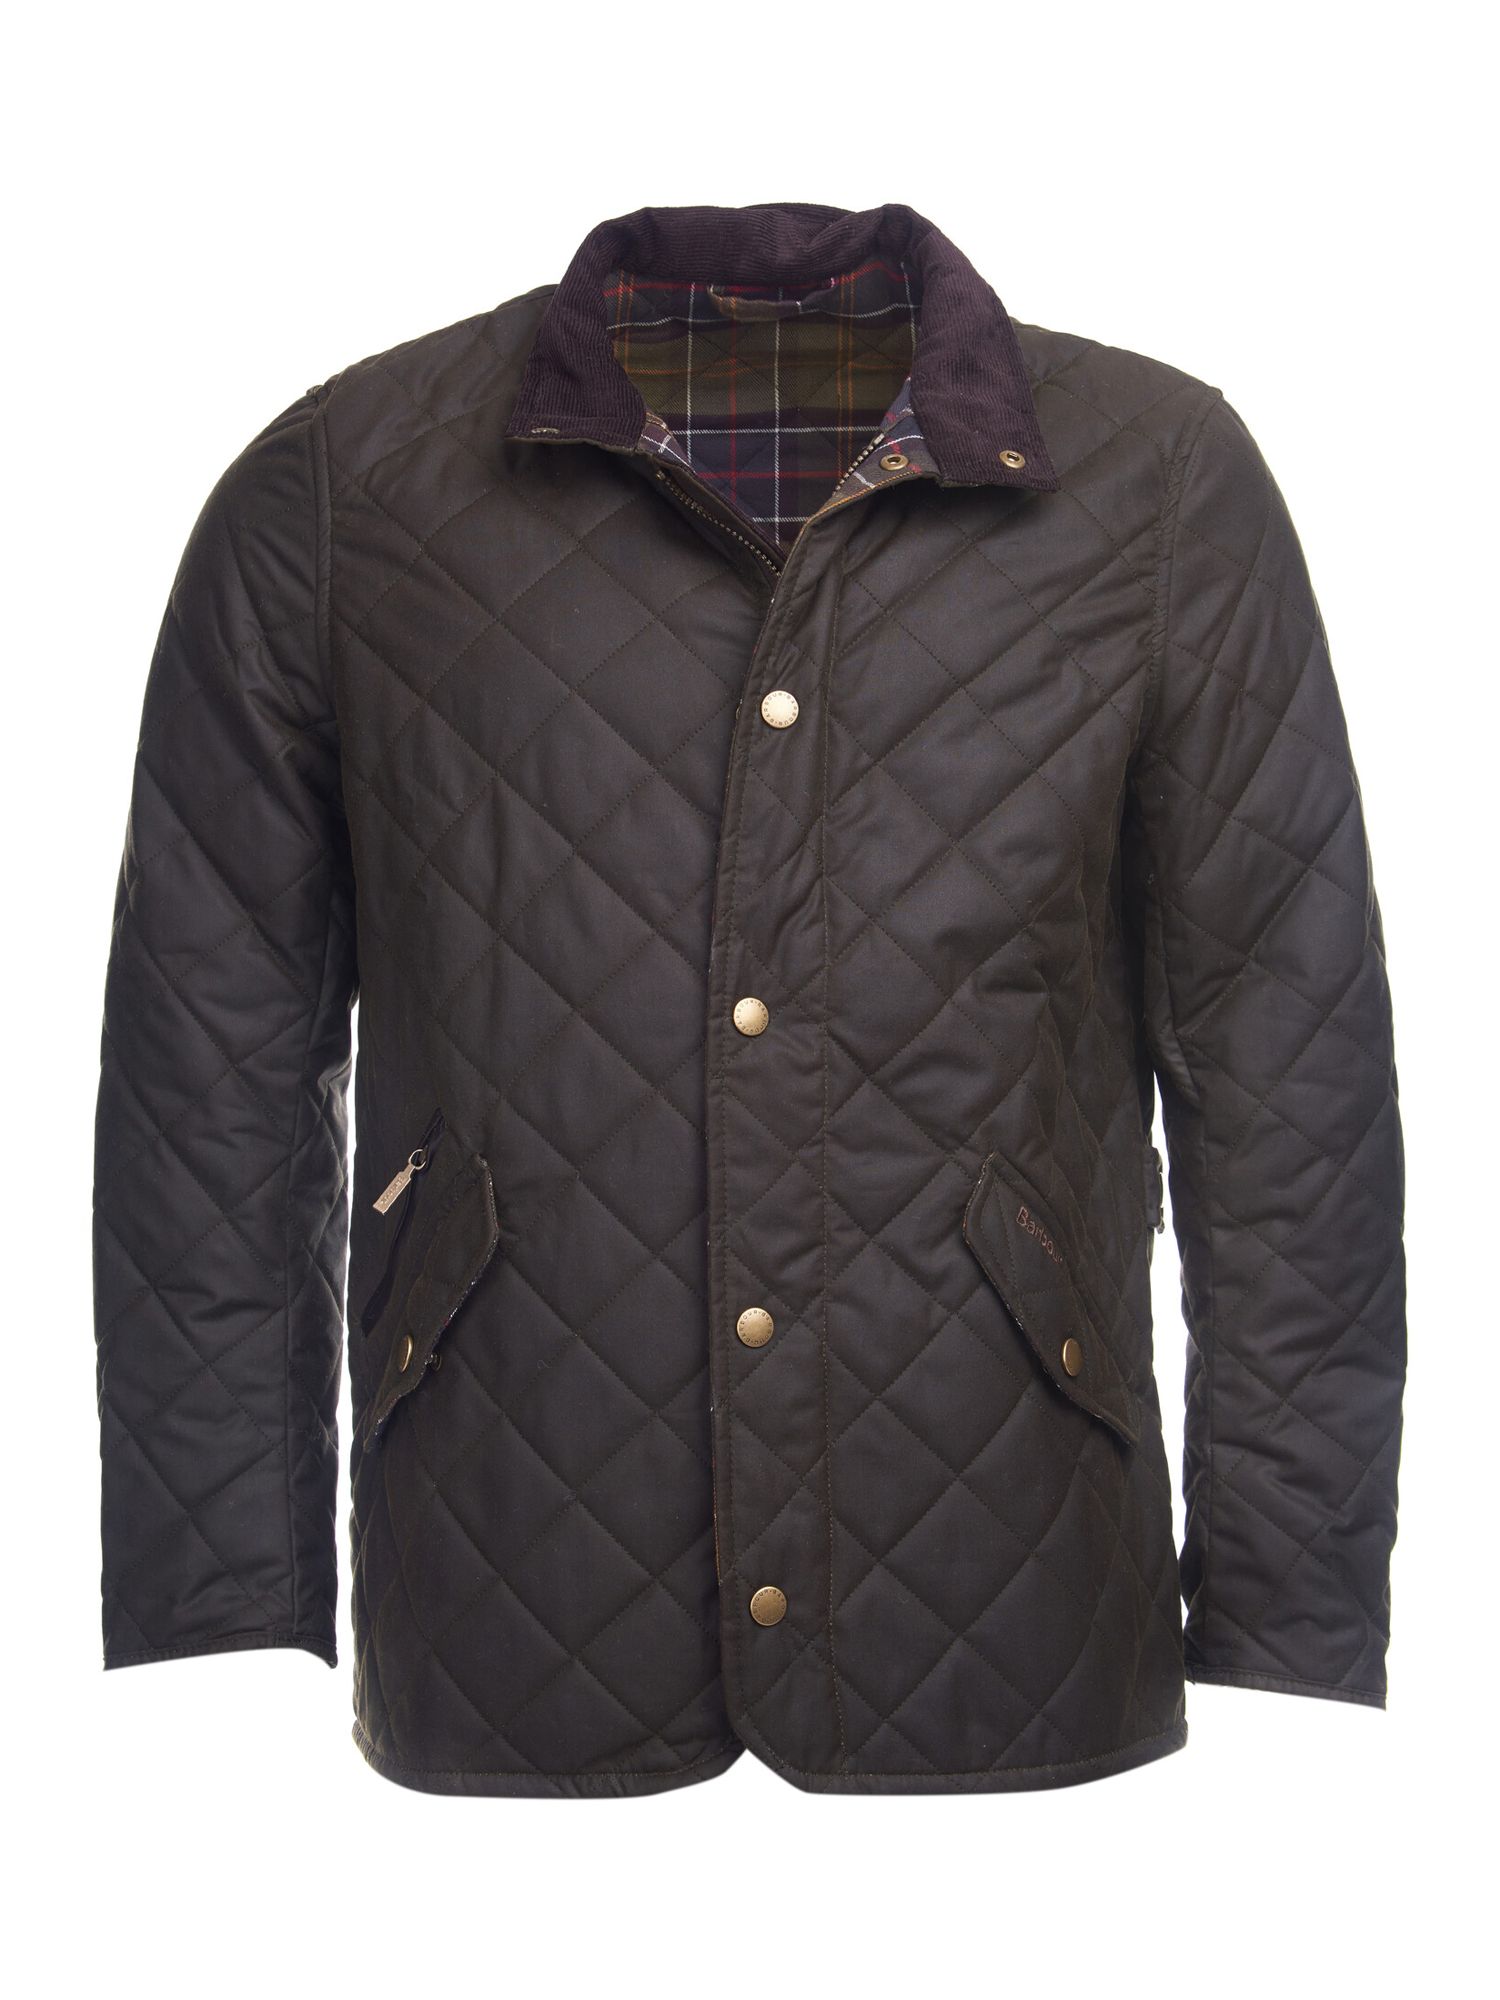 Barbour Waxed Quilted Funnel Neck Jacket, Olive at John Lewis & Partners